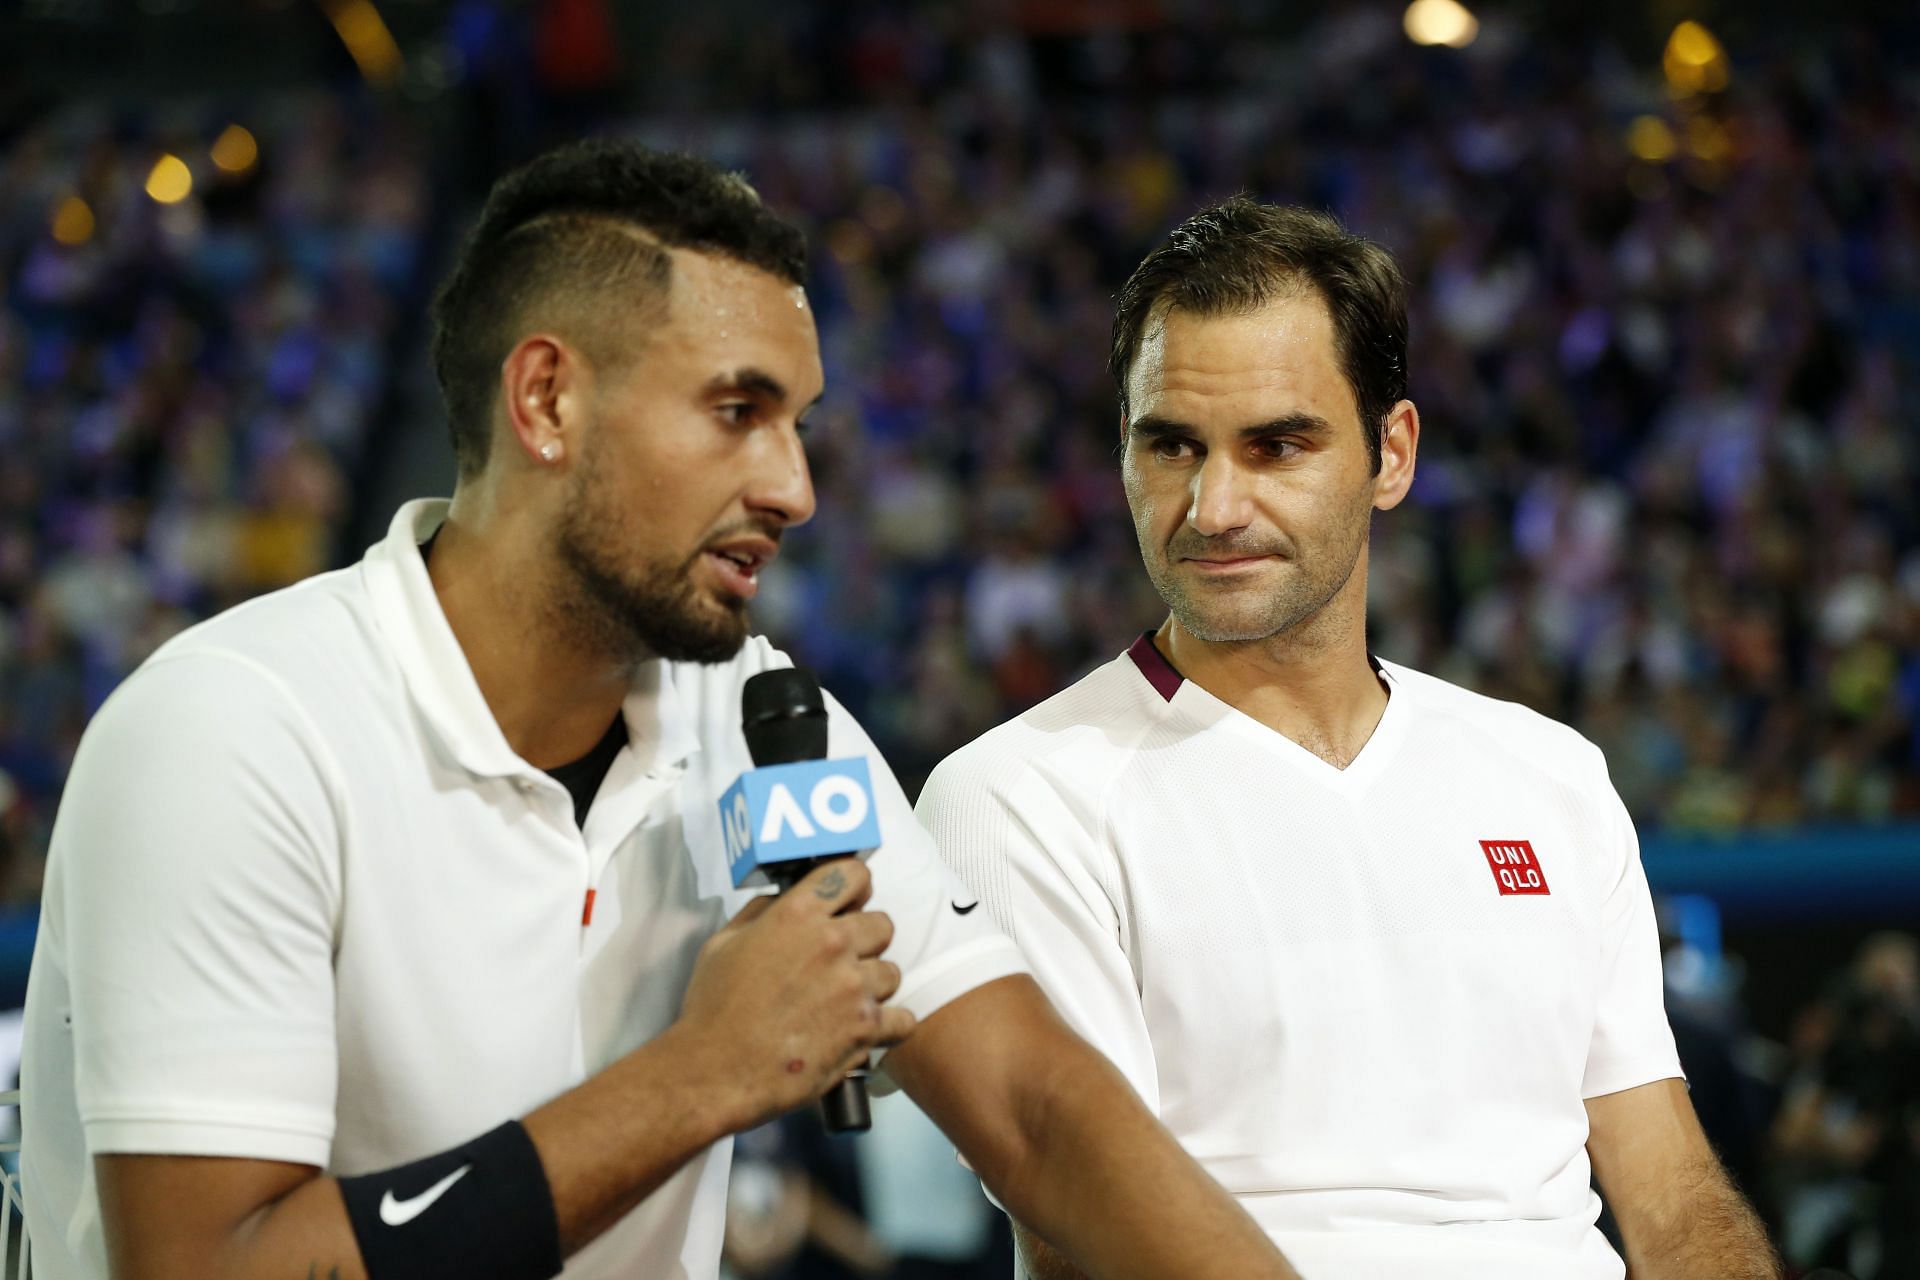 Nick Kyrgios and Roger Federer at the Tennis Rally for Relief in 2020.